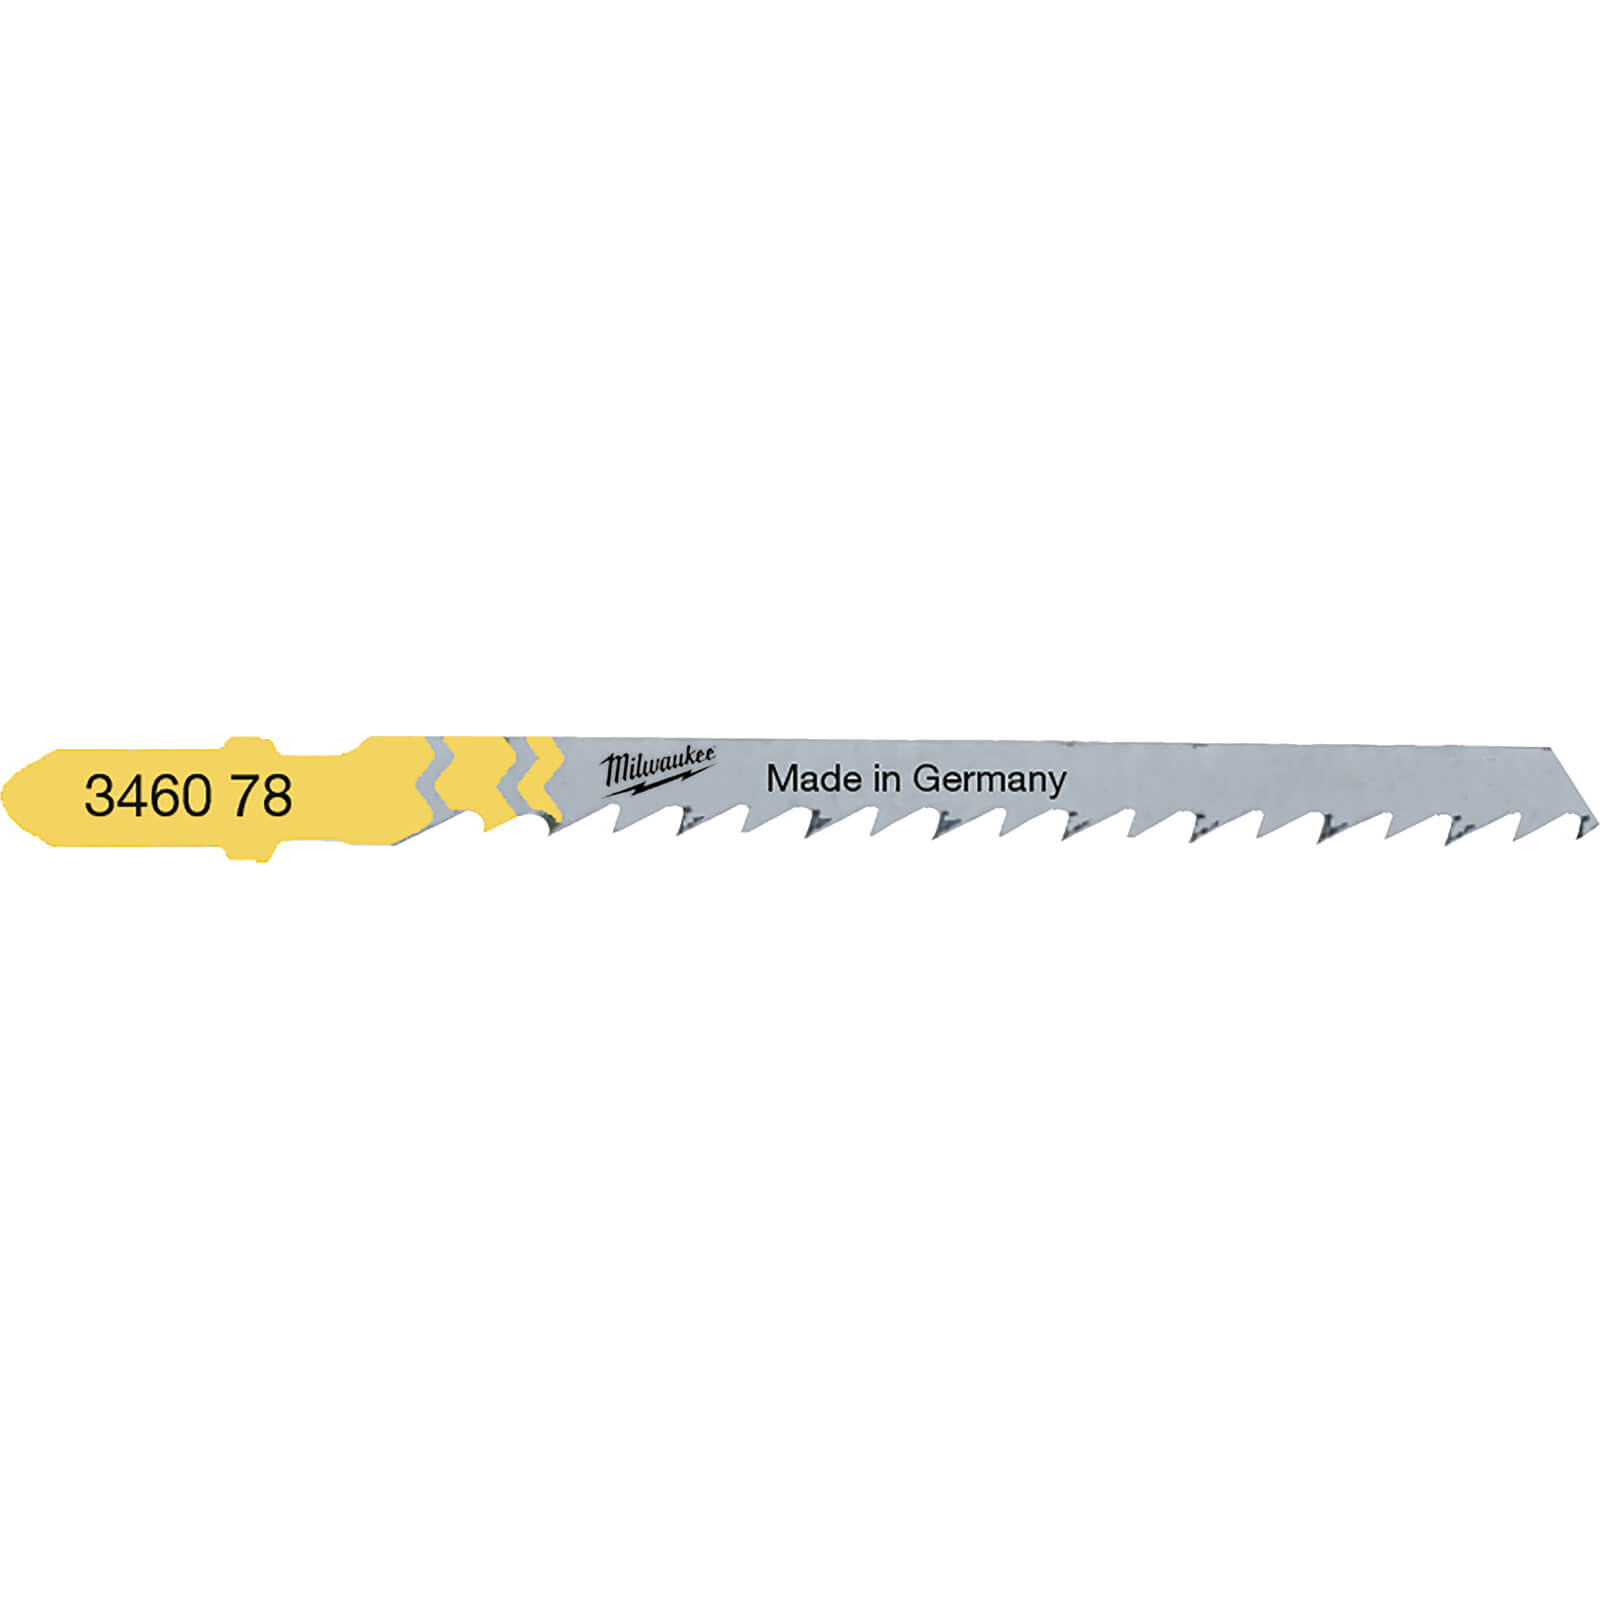 Image of Milwaukee T244D Wood and Plastic Curve Cutting Jigsaw Blades Pack of 25